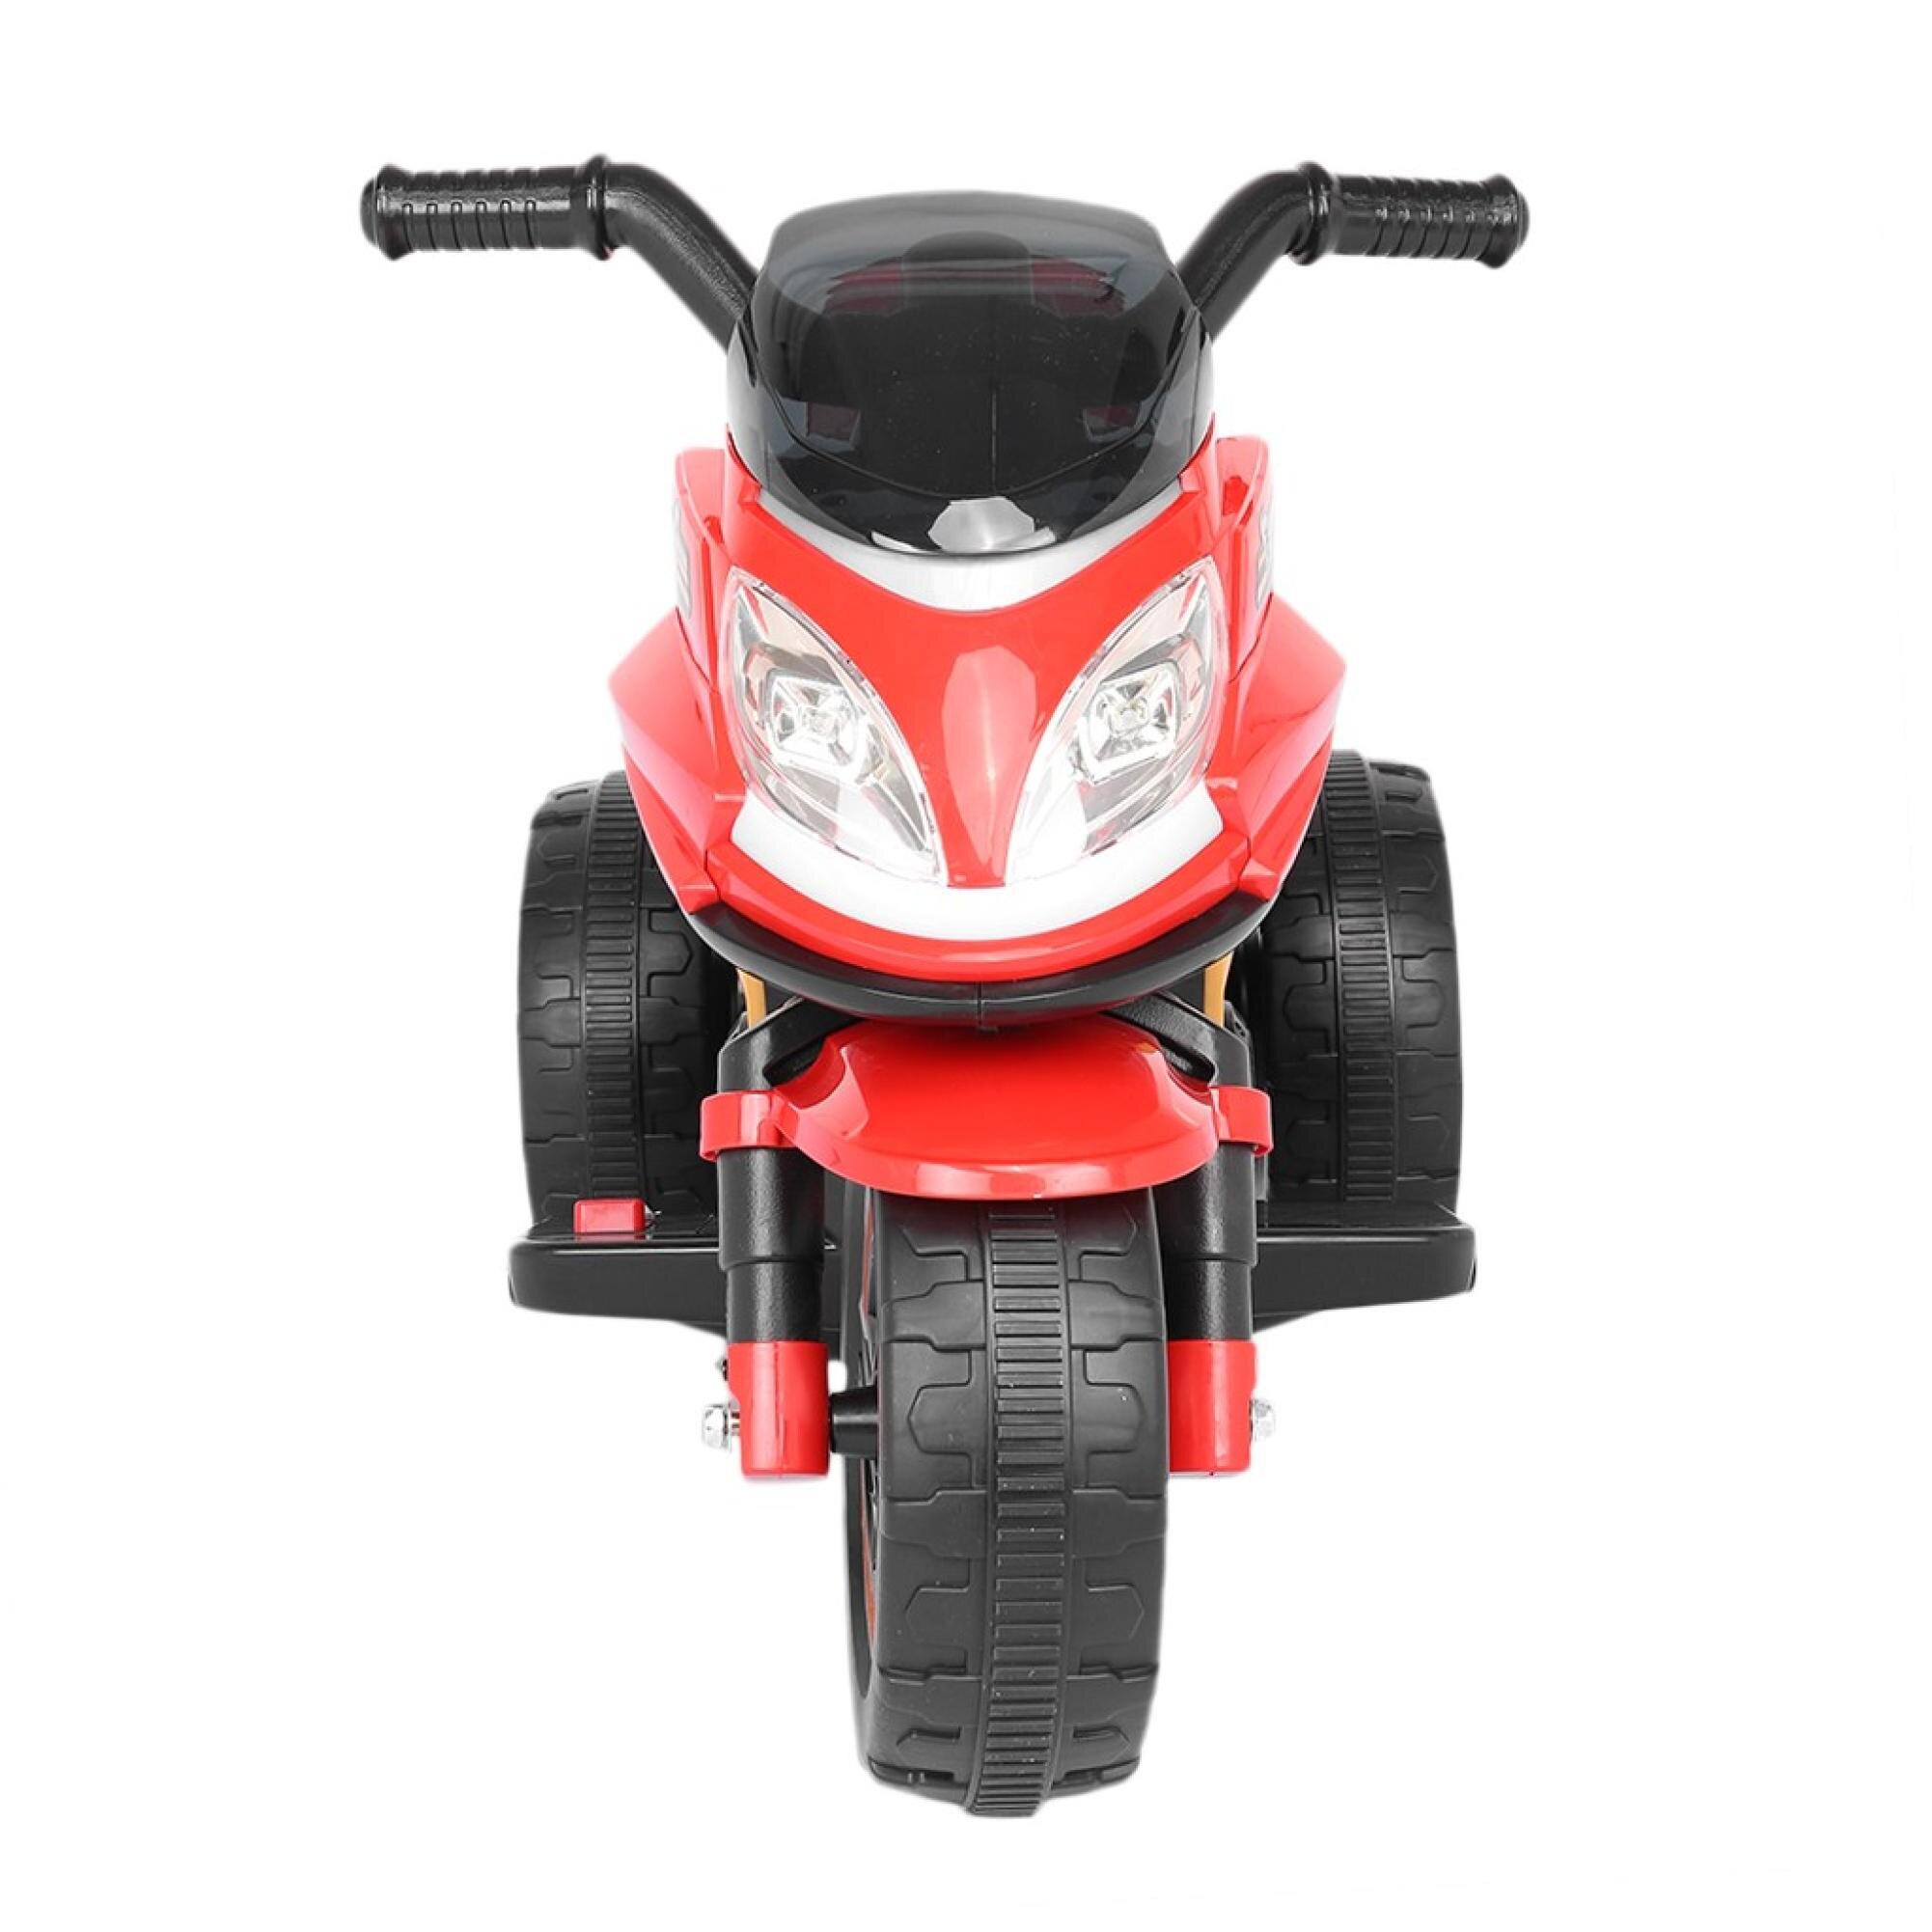 Kids Ride-On Motorcycle 6V Battery Powered Motorcycle Toy Headlights Music Red